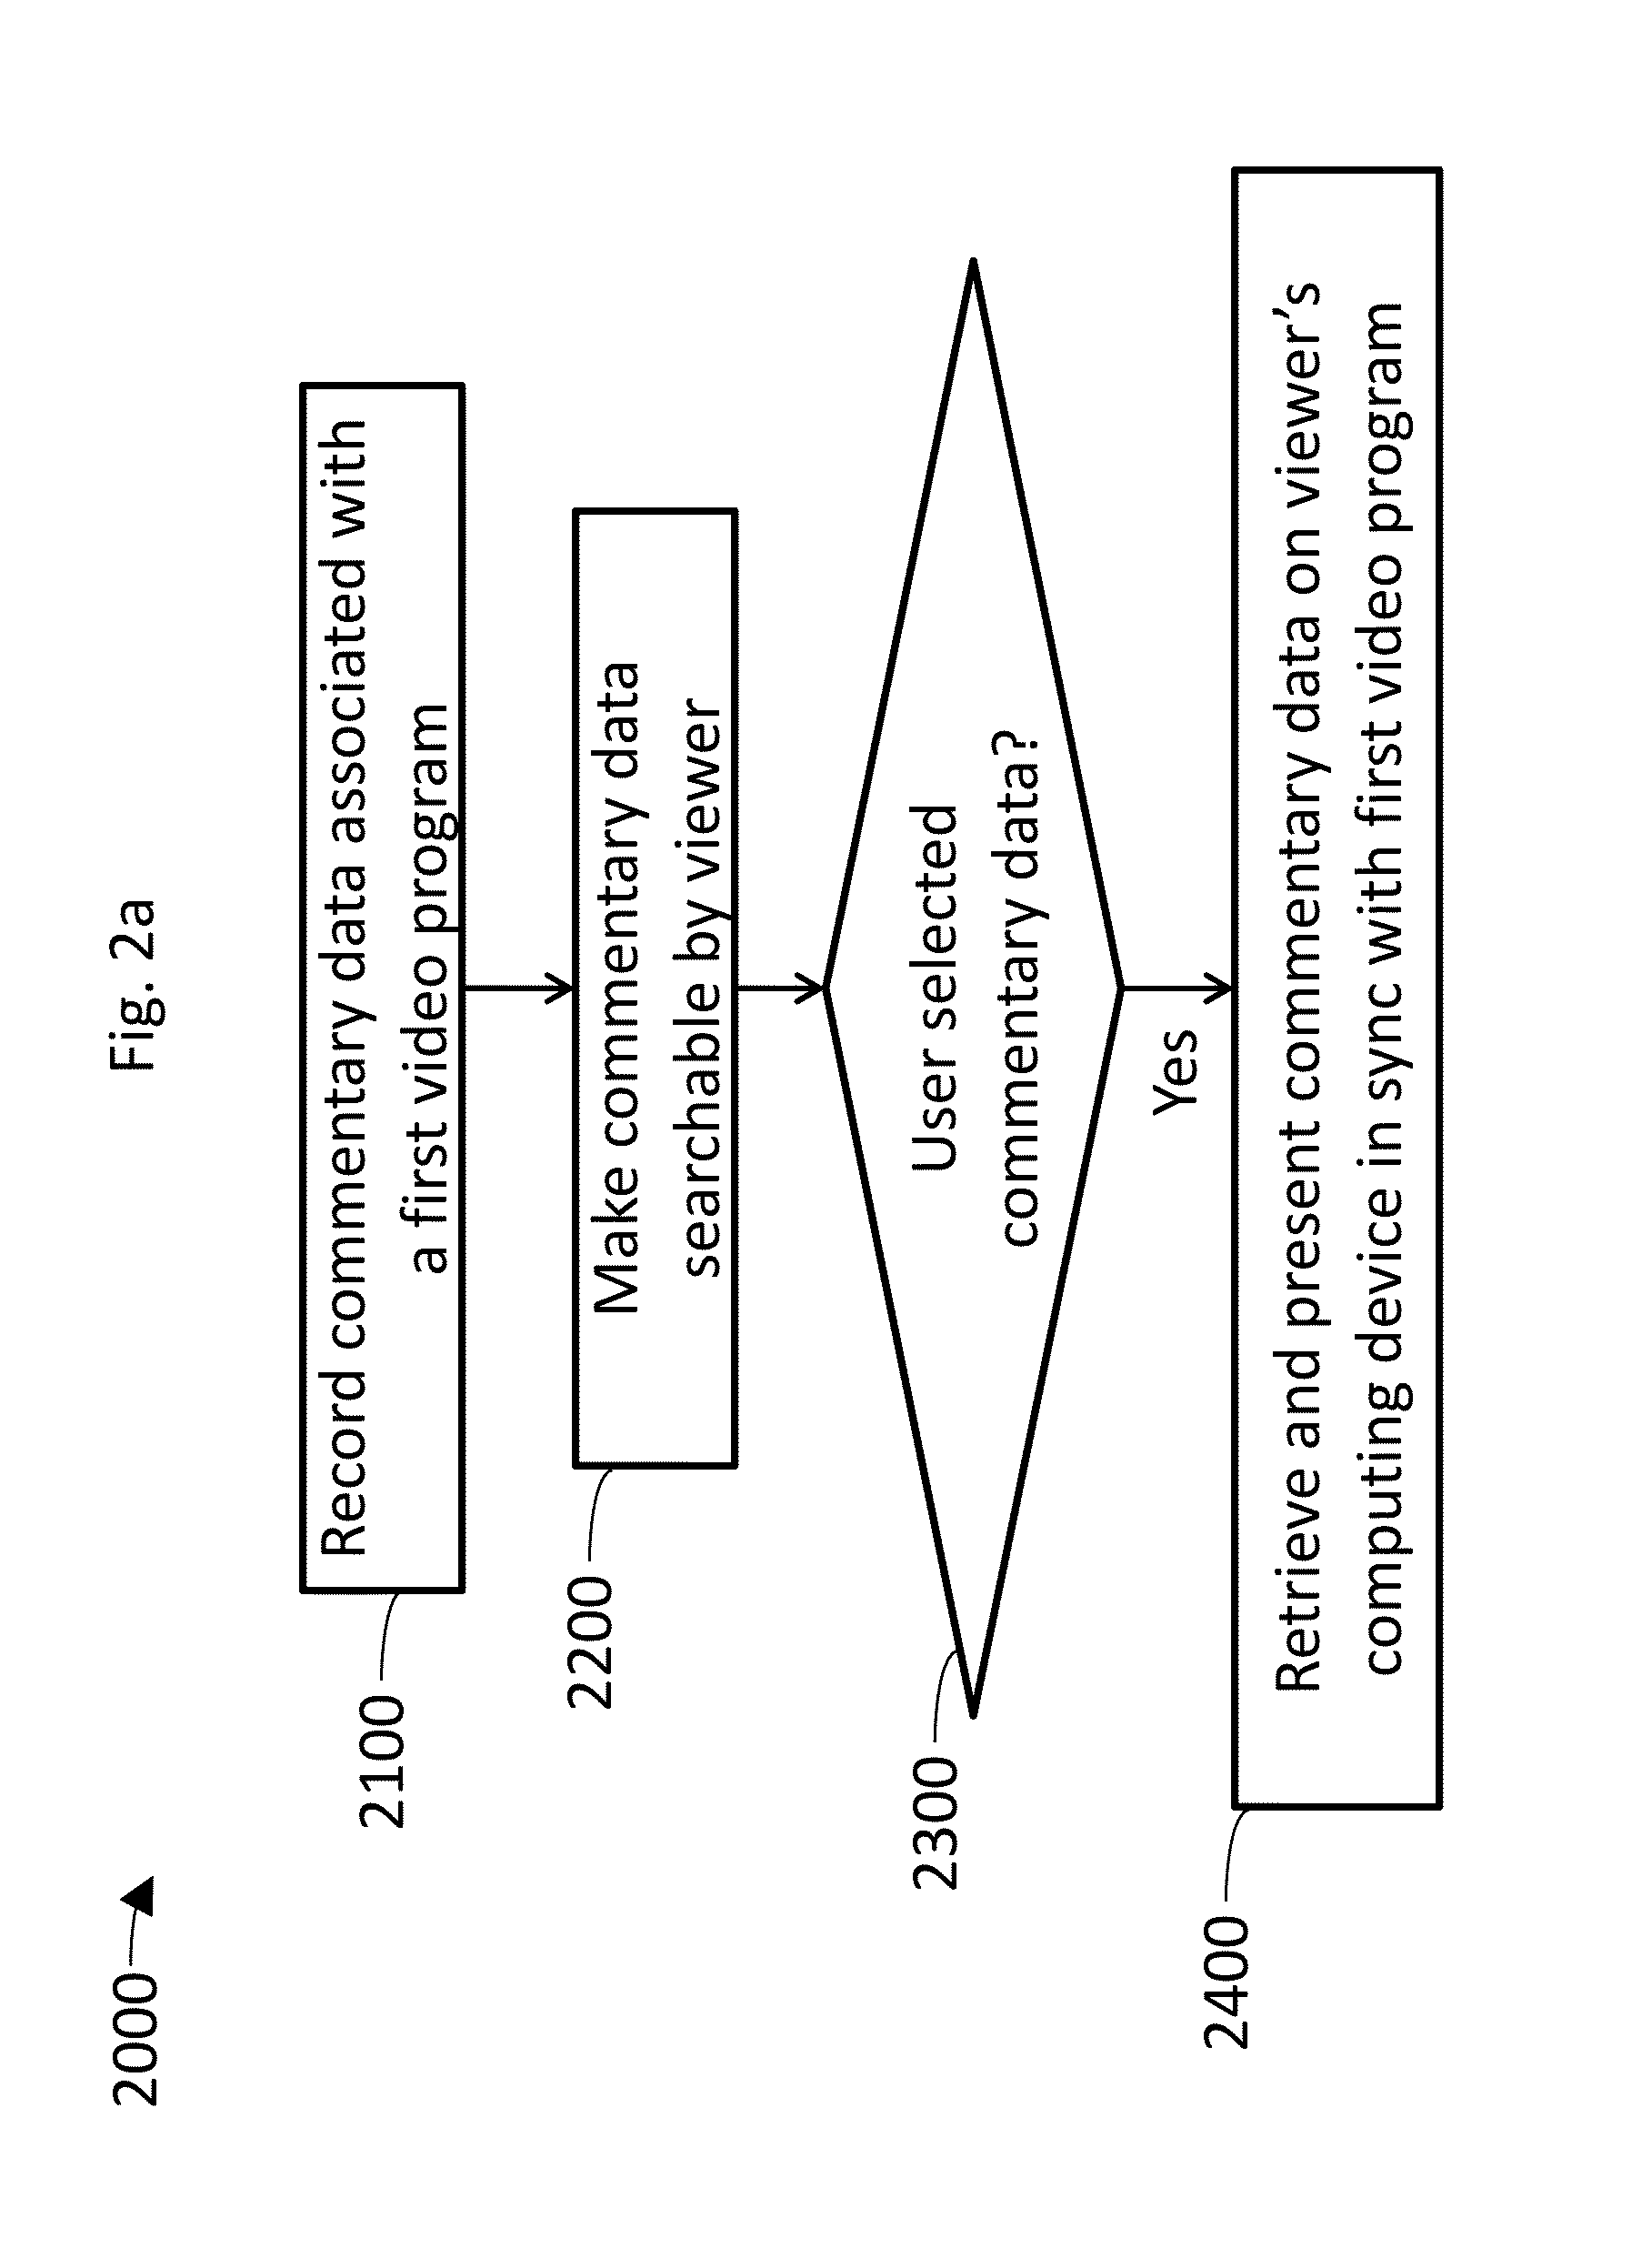 Systems and methods for enabling and managing social television